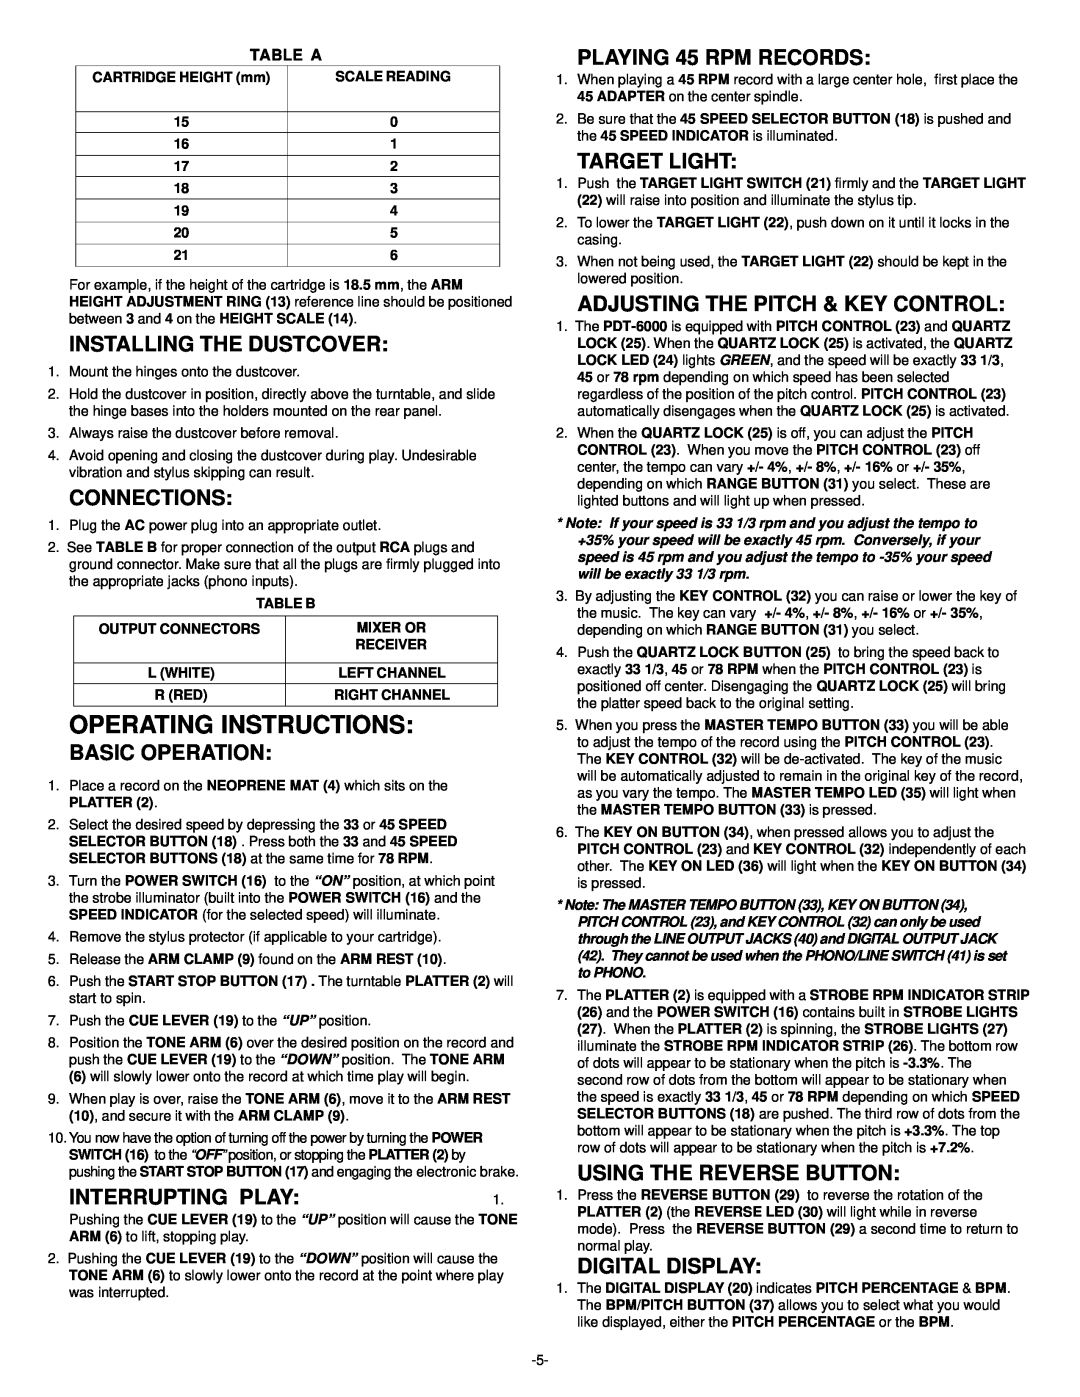 Gemini PDT-6000 Operating Instructions, Installing The Dustcover, Connections, Basic Operation, Interrupting Play, Table A 